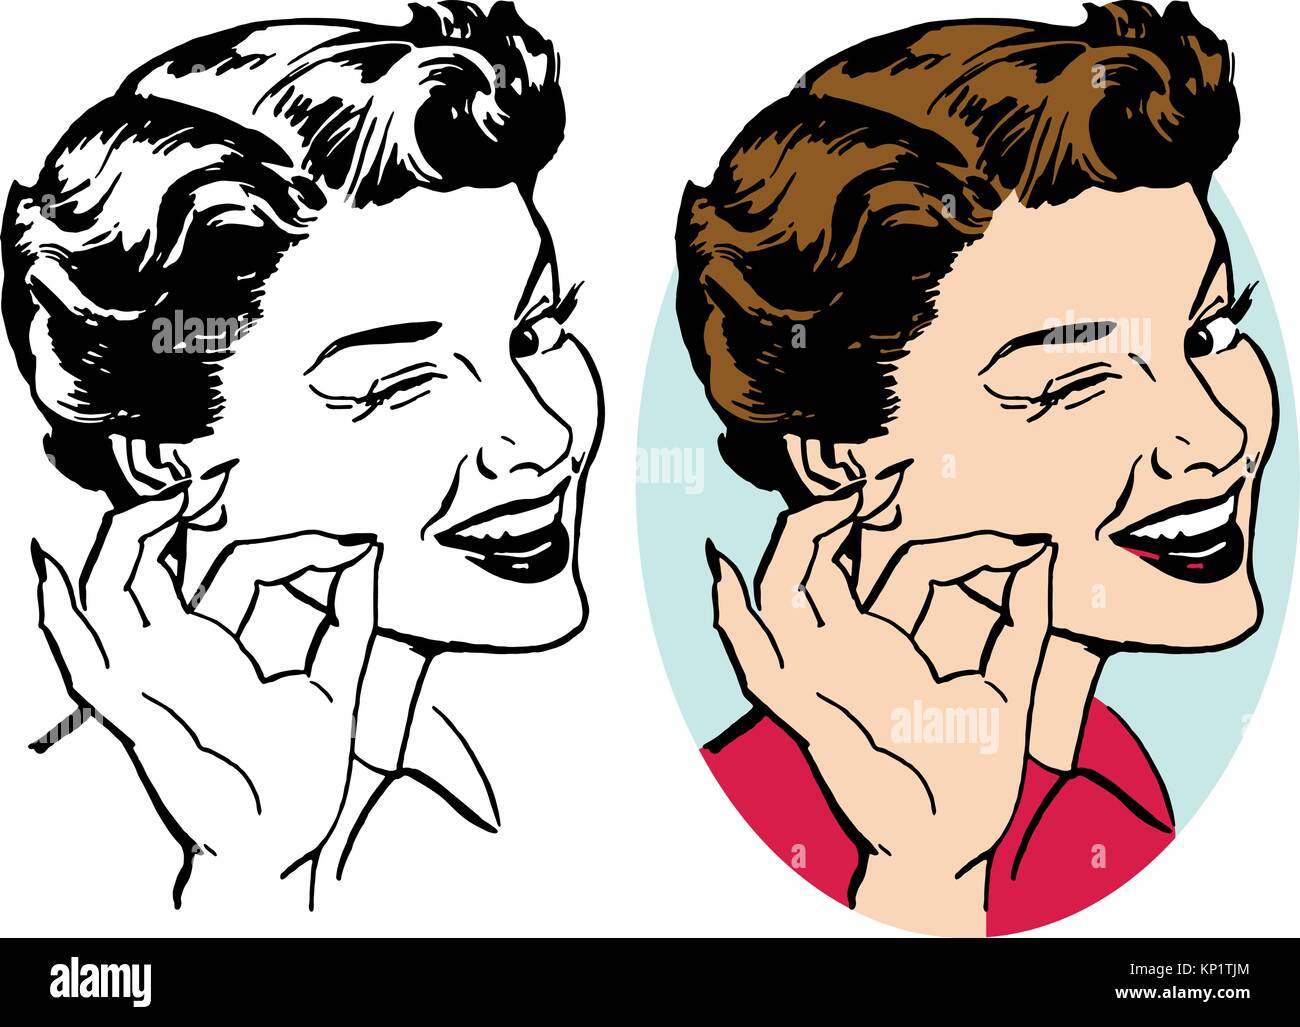 A woman winking and making the okay gesture with her fingers. Stock Vector